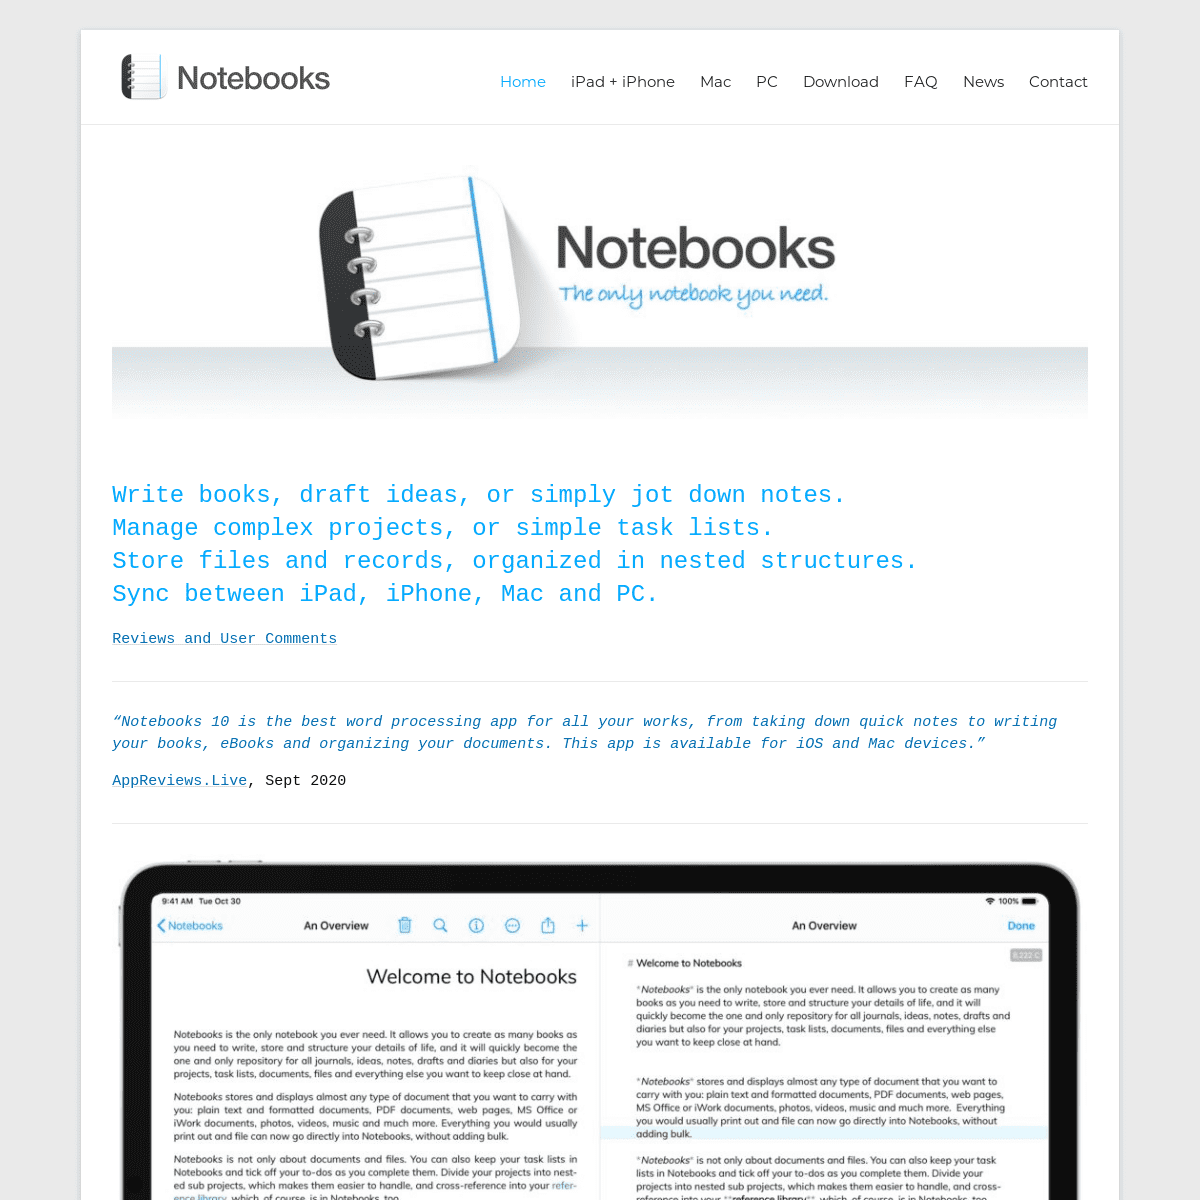 A complete backup of https://notebooksapp.com